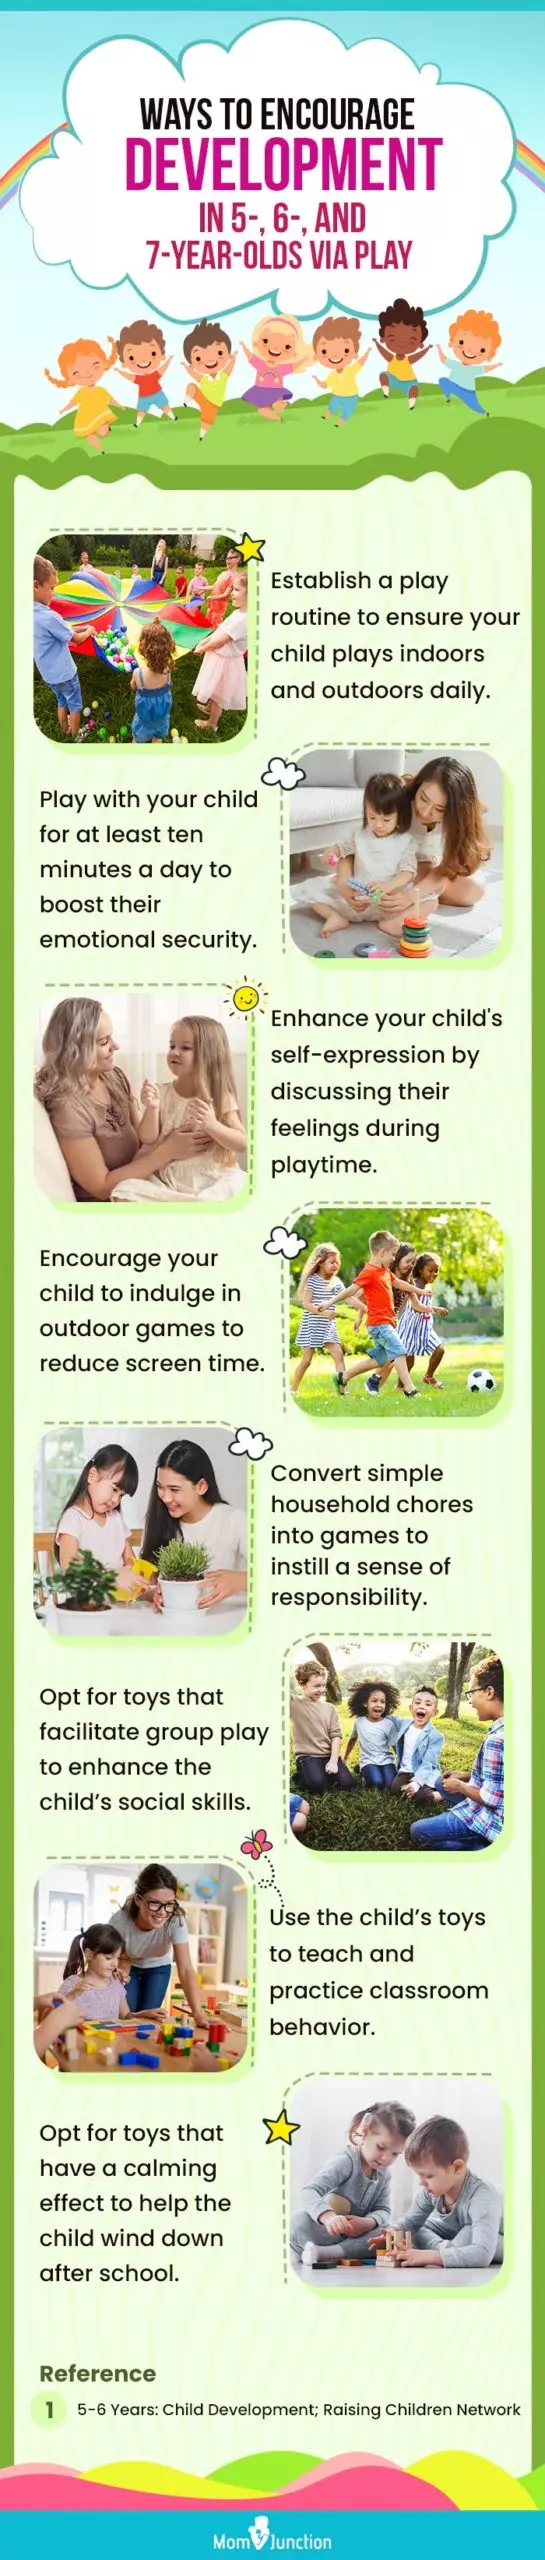 Ways-To-Encourage-Development-In-5-,-6-,-And-7-Year-Olds-Via-Play (infographic)